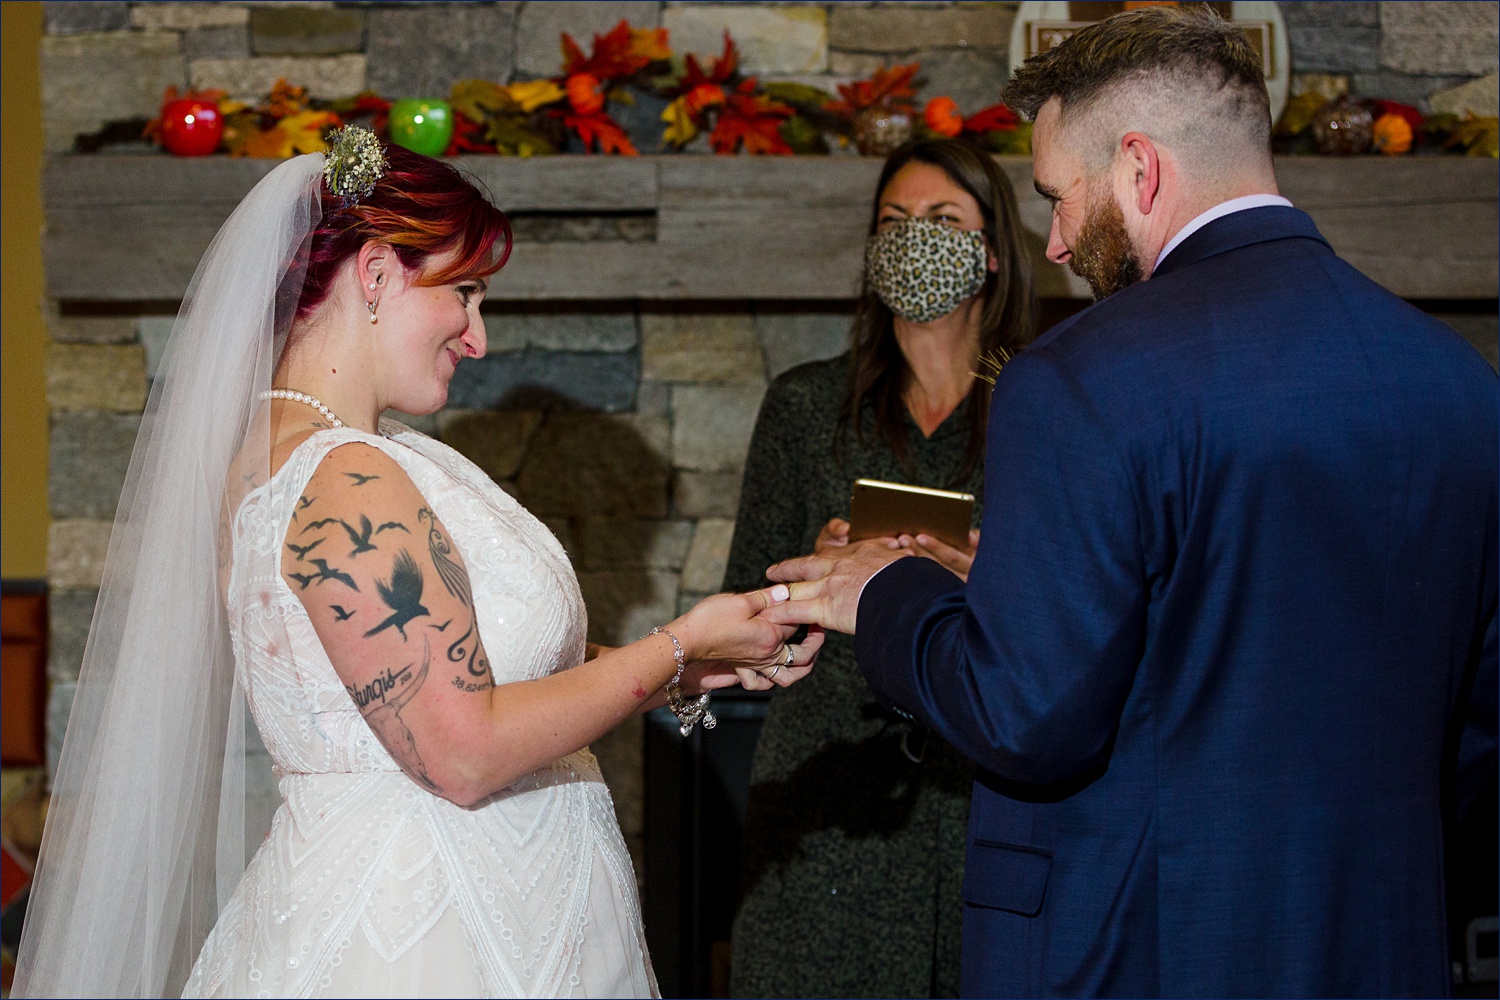 The ring is a little tricky going on at the wedding ceremony